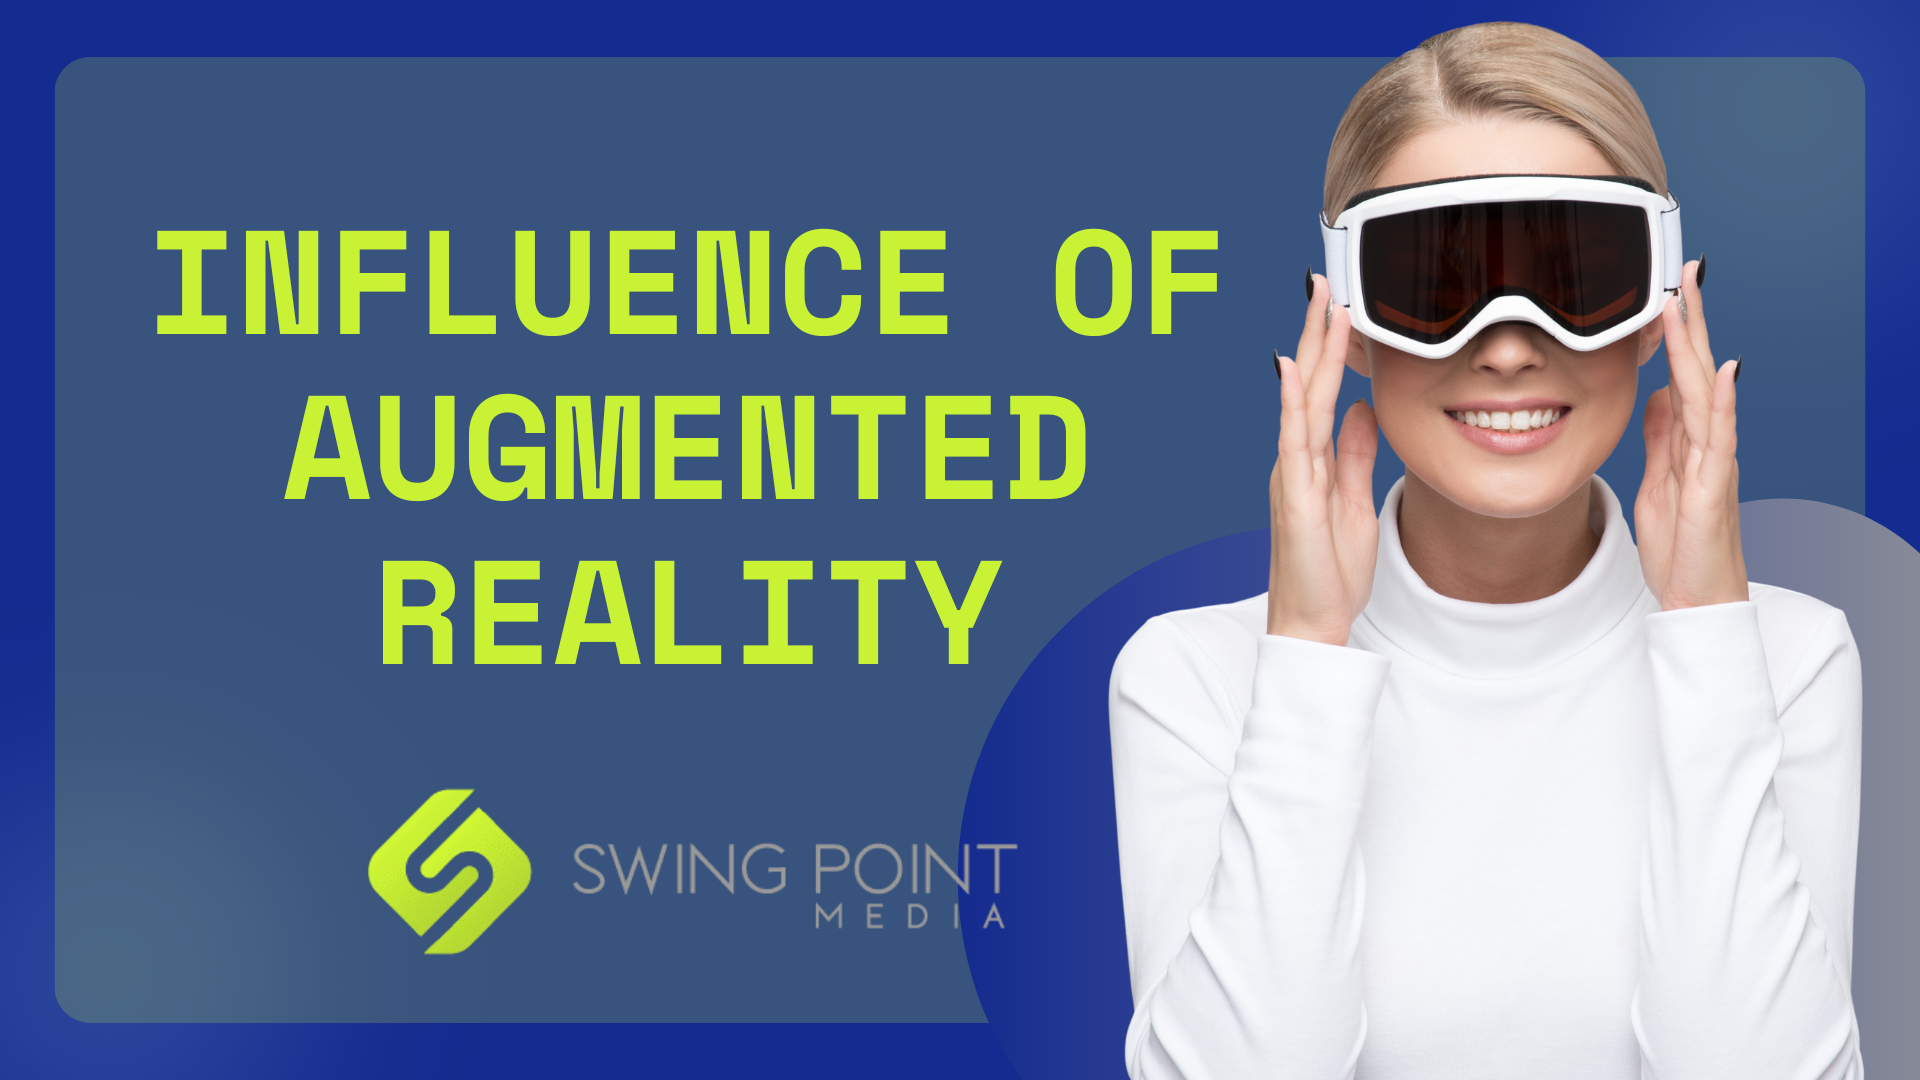 Influence of Augmented Reality (AR) on Consumer Experience